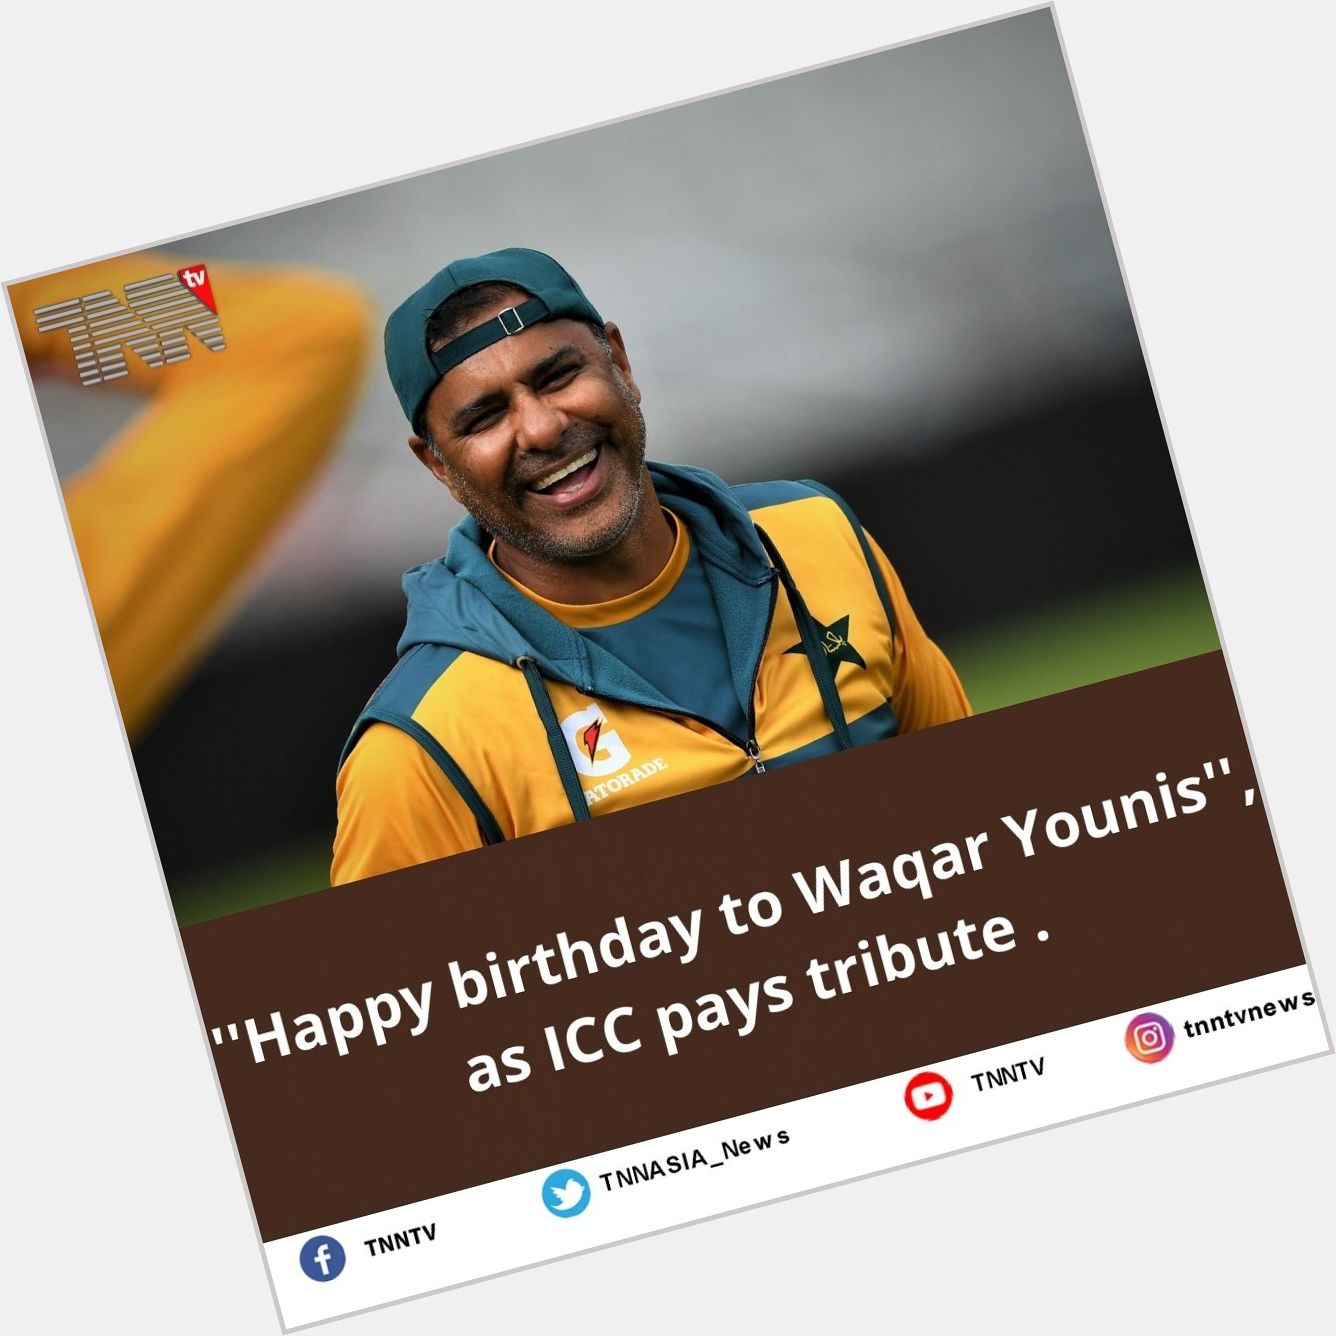 \\Happy birthday to Waqar Younis\\, as ICC pays tribute .    